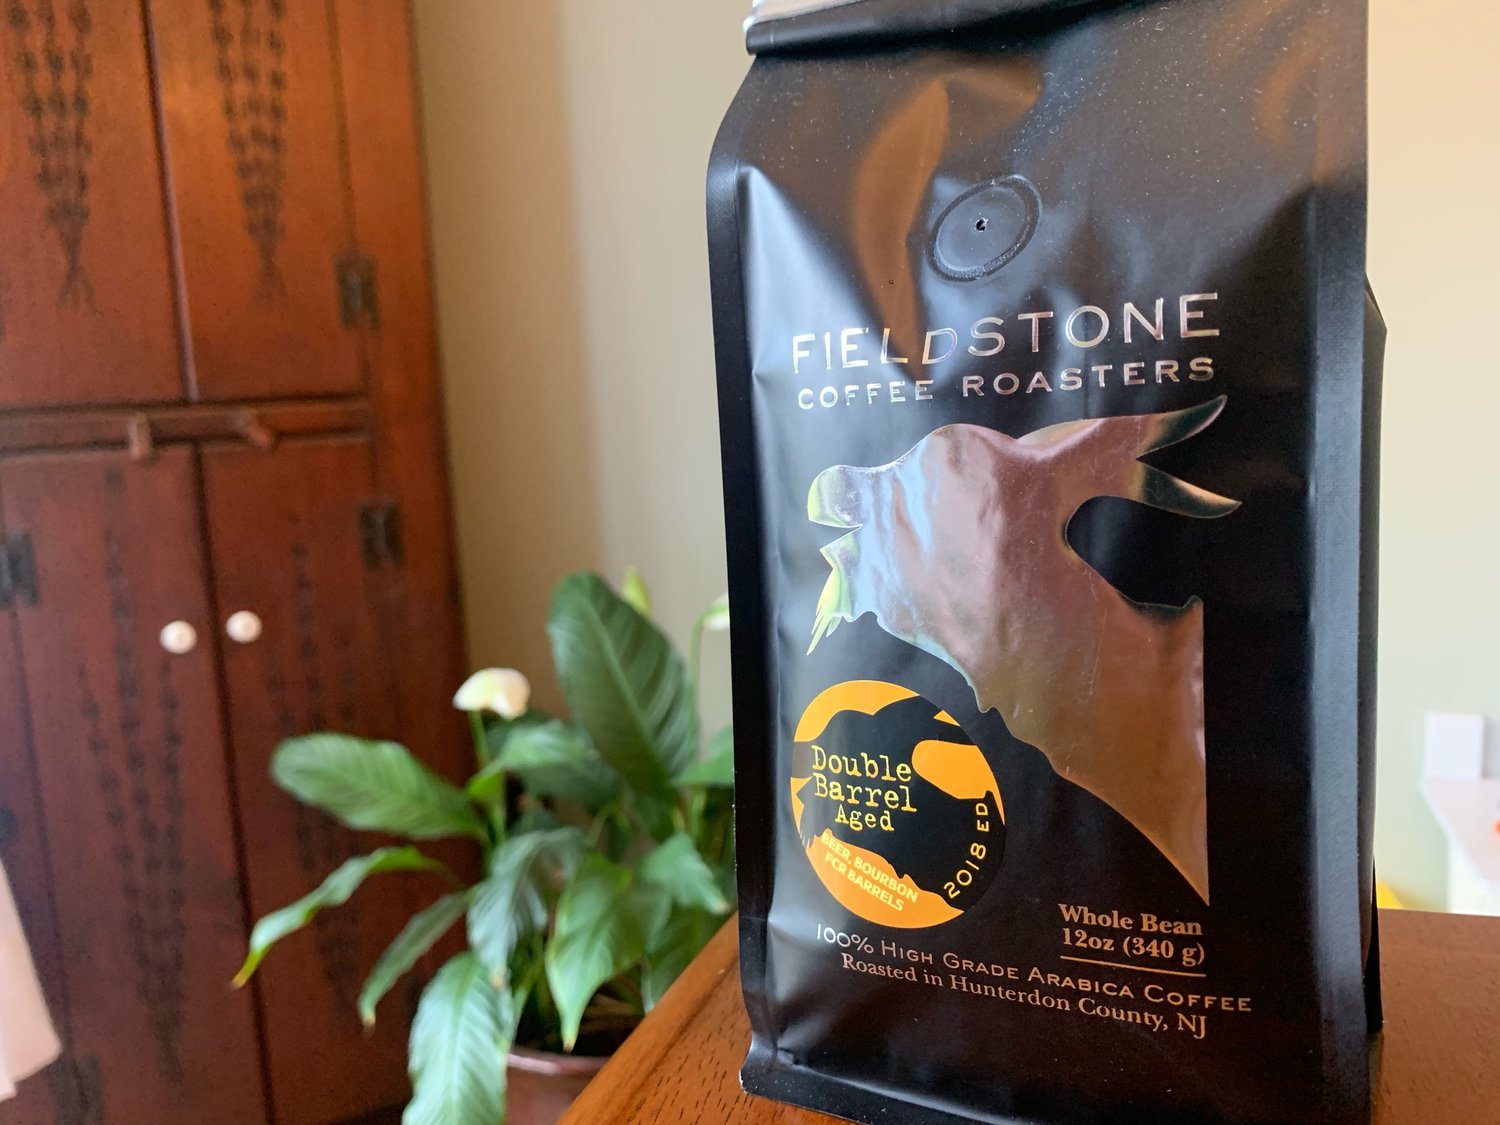 Review: Counter Culture Coffee Forty-Six Dark Roast — Creaky Bottom Bracket